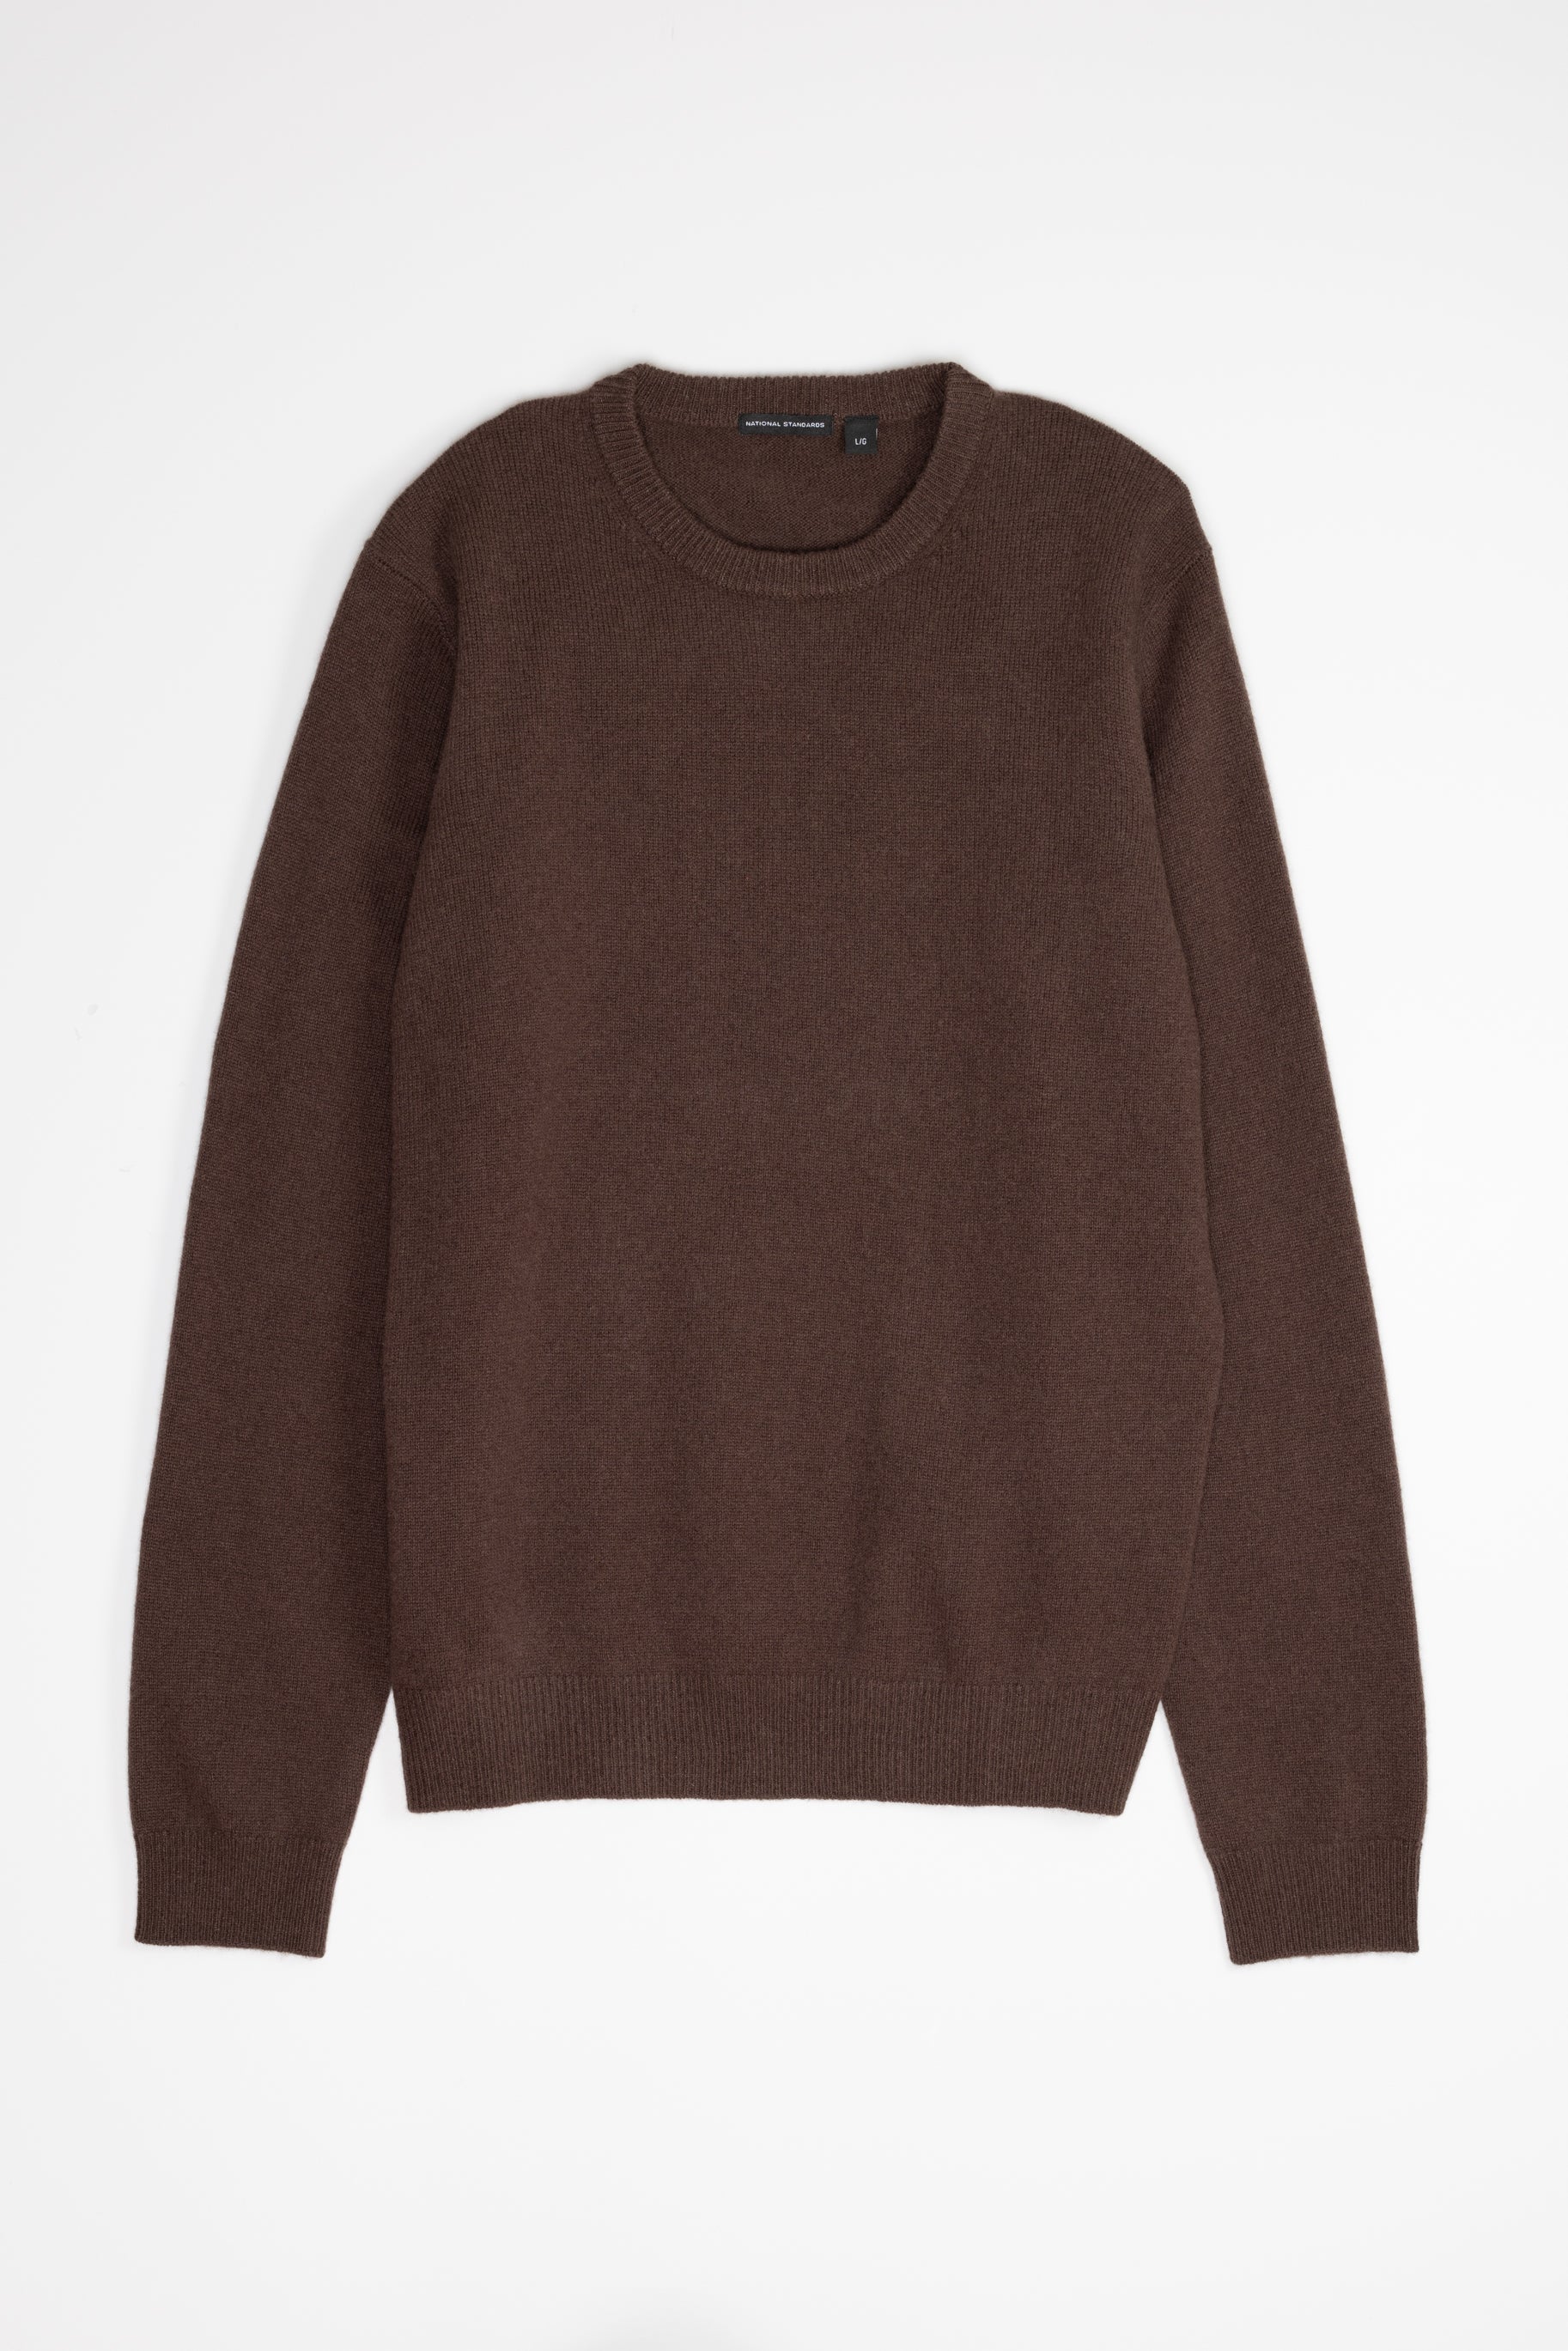 New Wool Crew in Brown 01